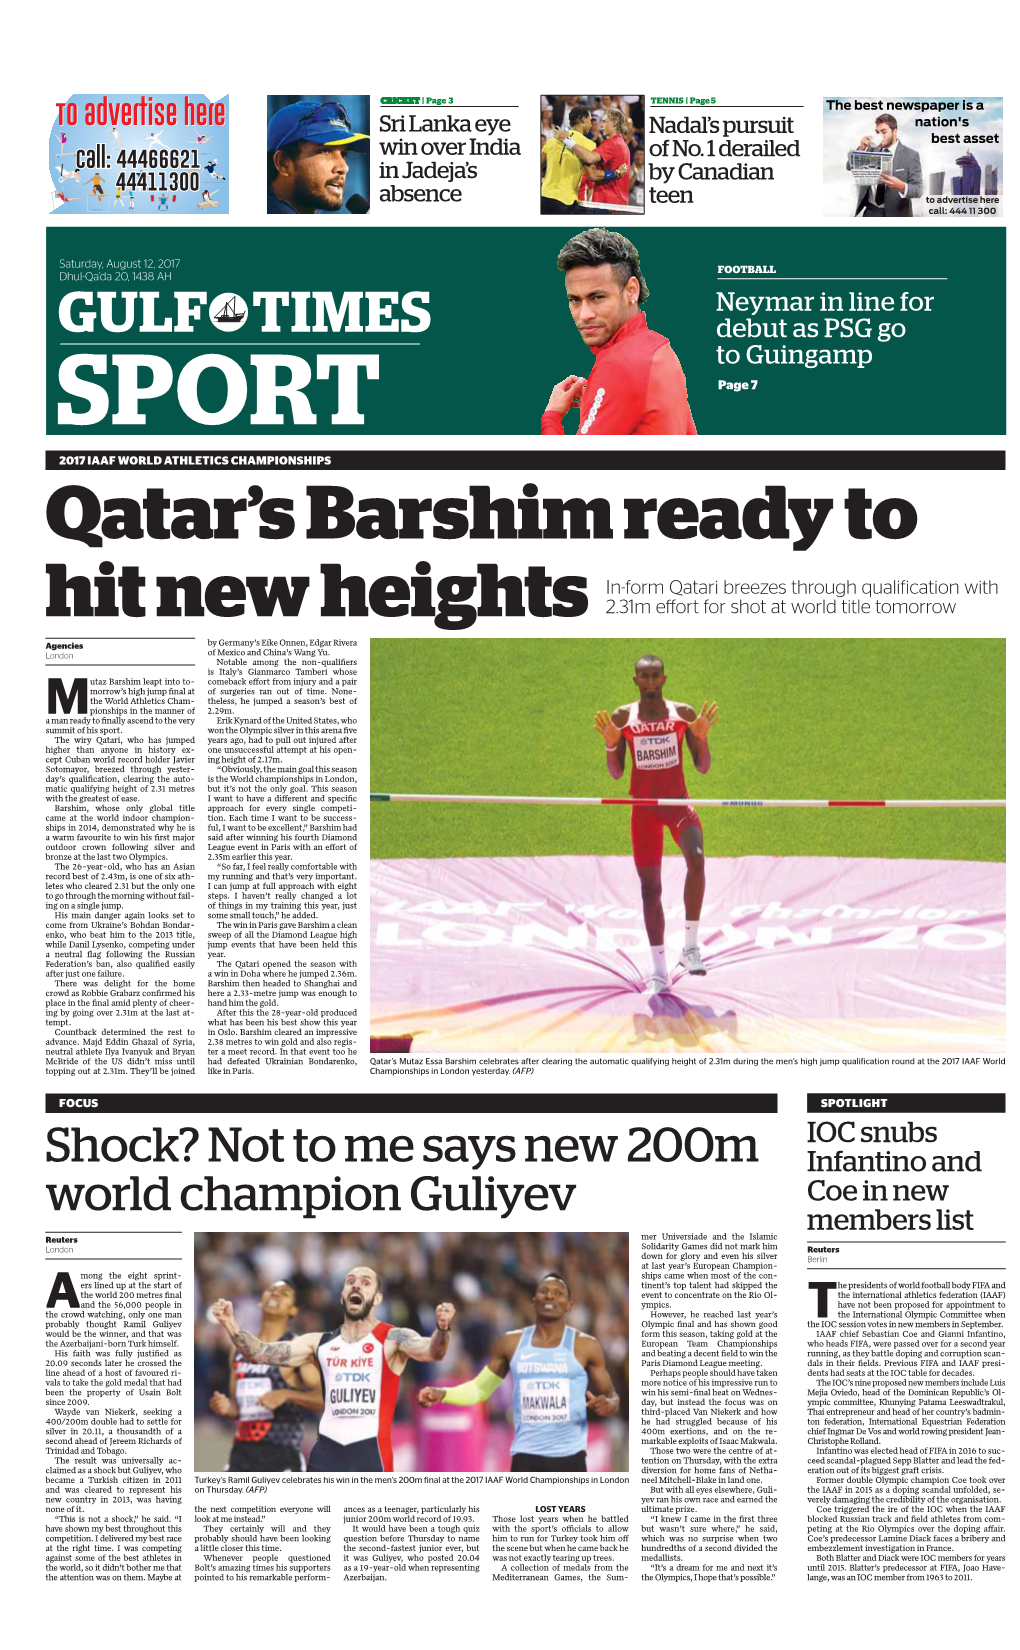 Neymar in Line for GULF TIMES Debut As PSG Go to Guingamp SPORT Page 7 2017 IAAF WORLD ATHLETICS CHAMPIONSHIPS Qatar’S Barshim Ready To